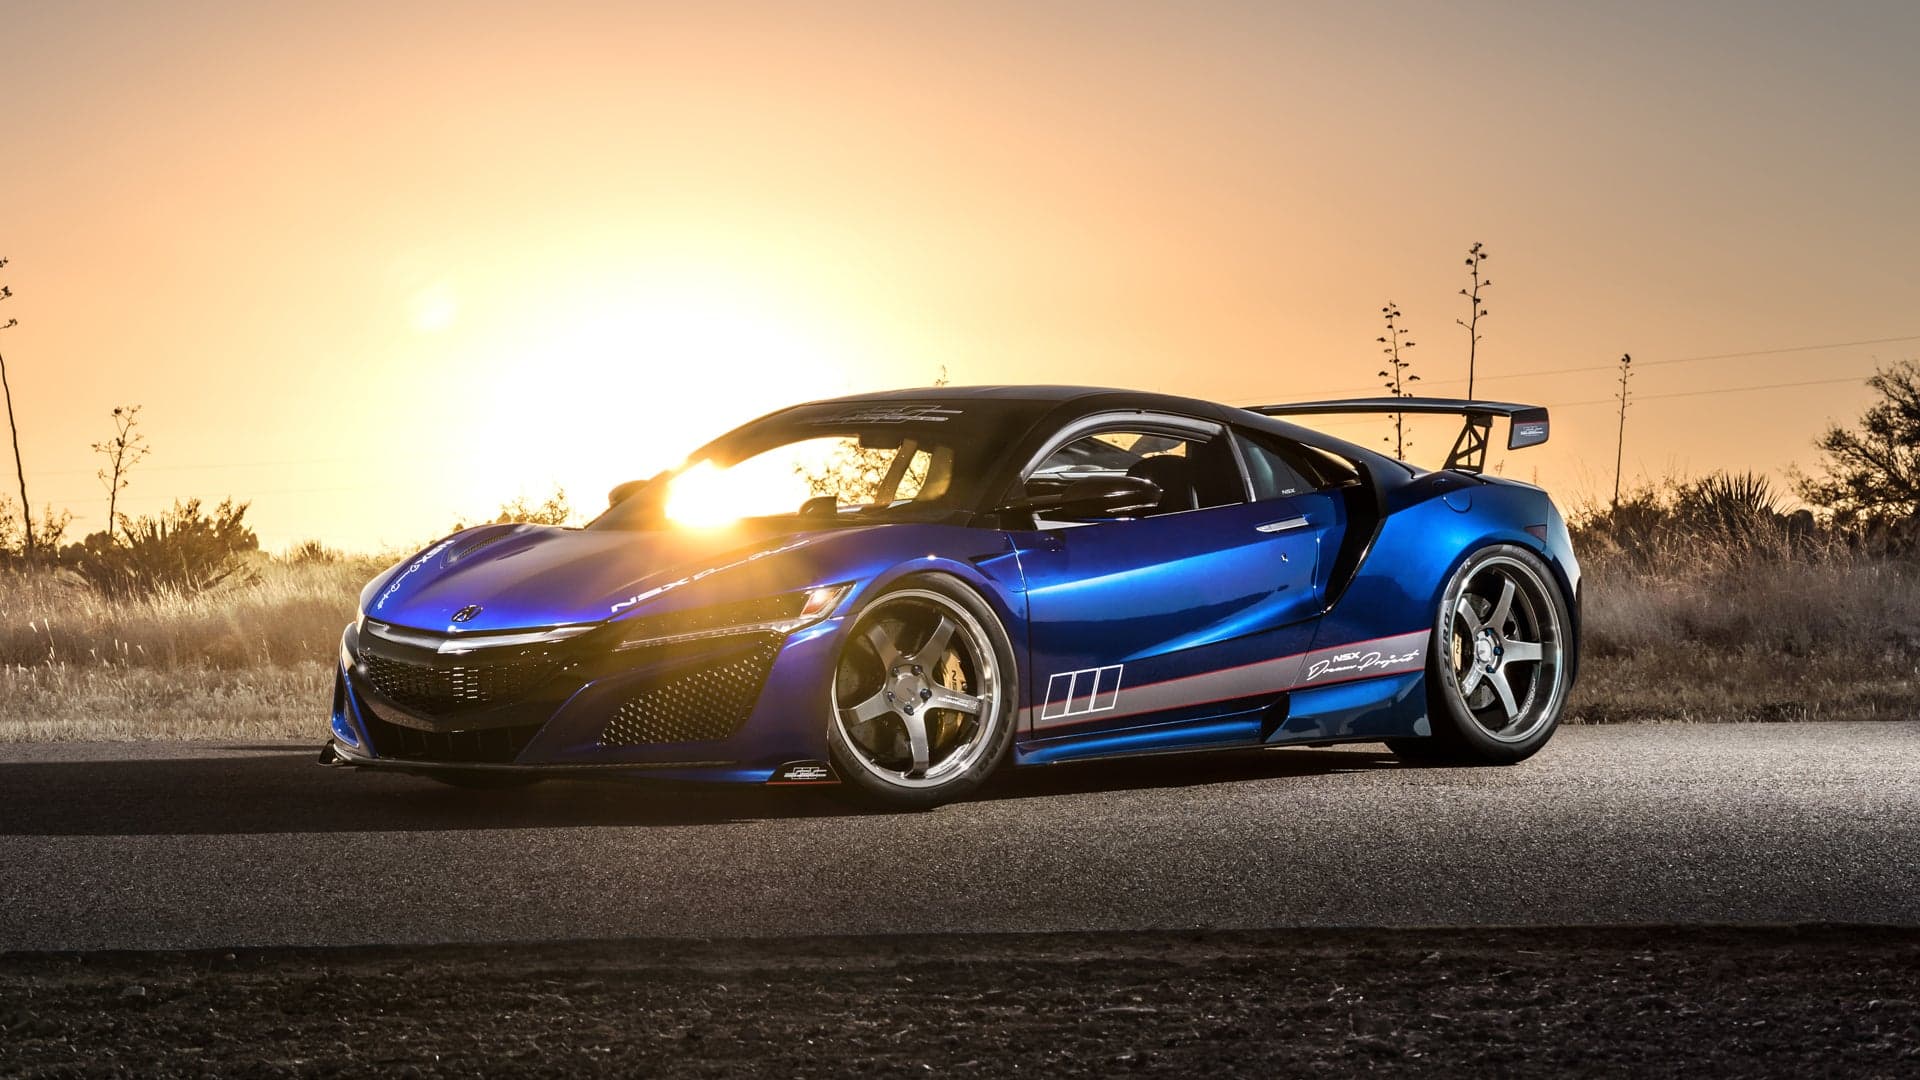 Acura NSX ‘Dream Project’ by ScienceofSpeed Headed to SEMA